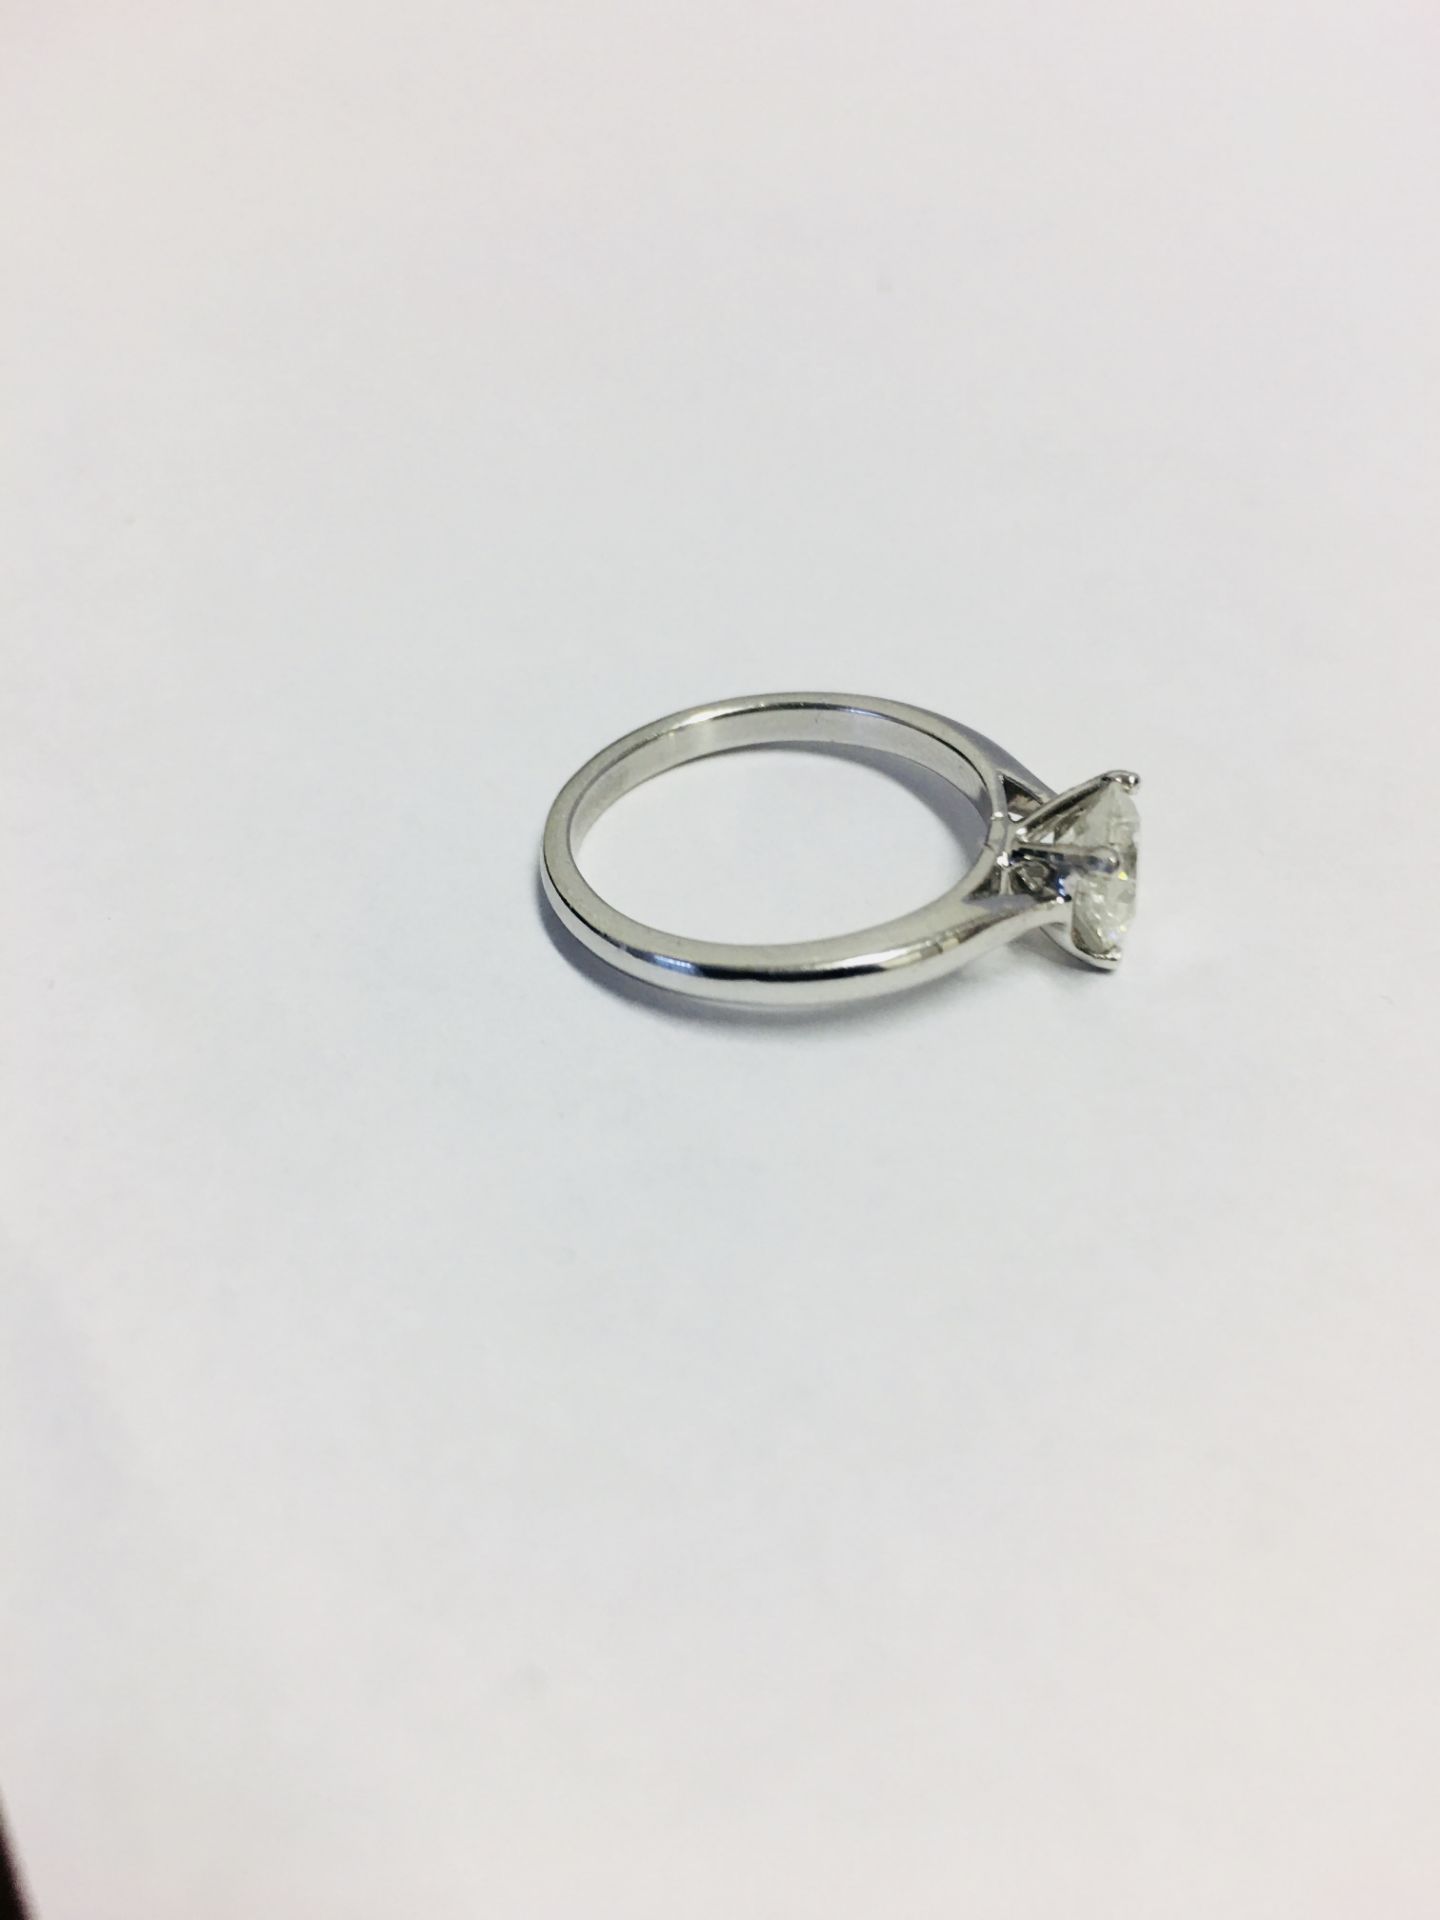 1.01Ct Diamond Solitaire Ring Set In 18Ct White Gold. - Image 5 of 5